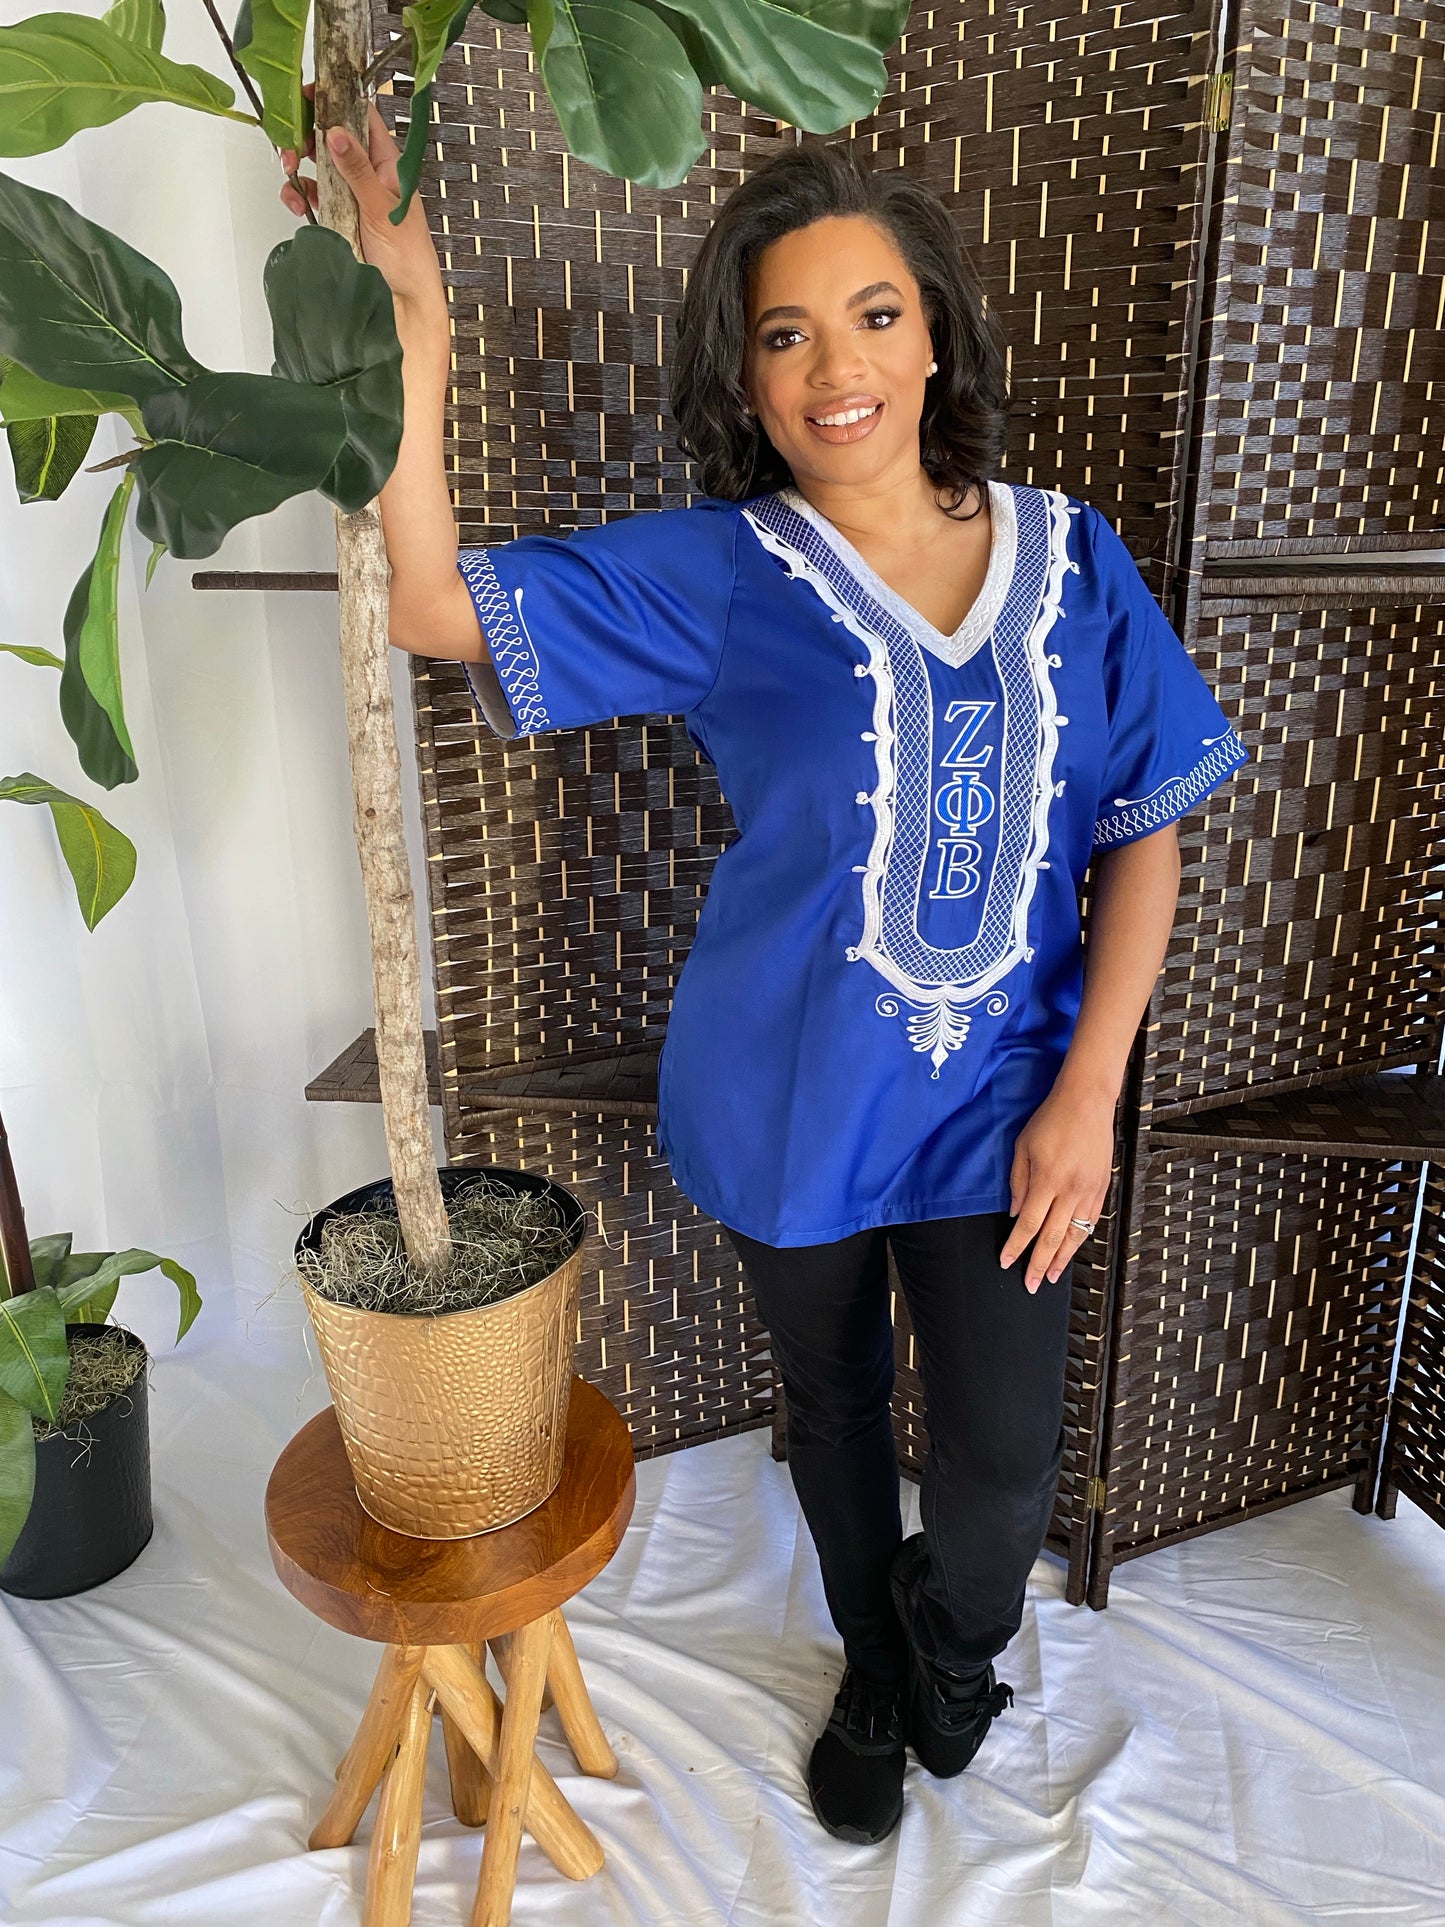 Zeta Phi Beta Embroidered Finer Womanhood Blouse- ships in 3-4 weeks